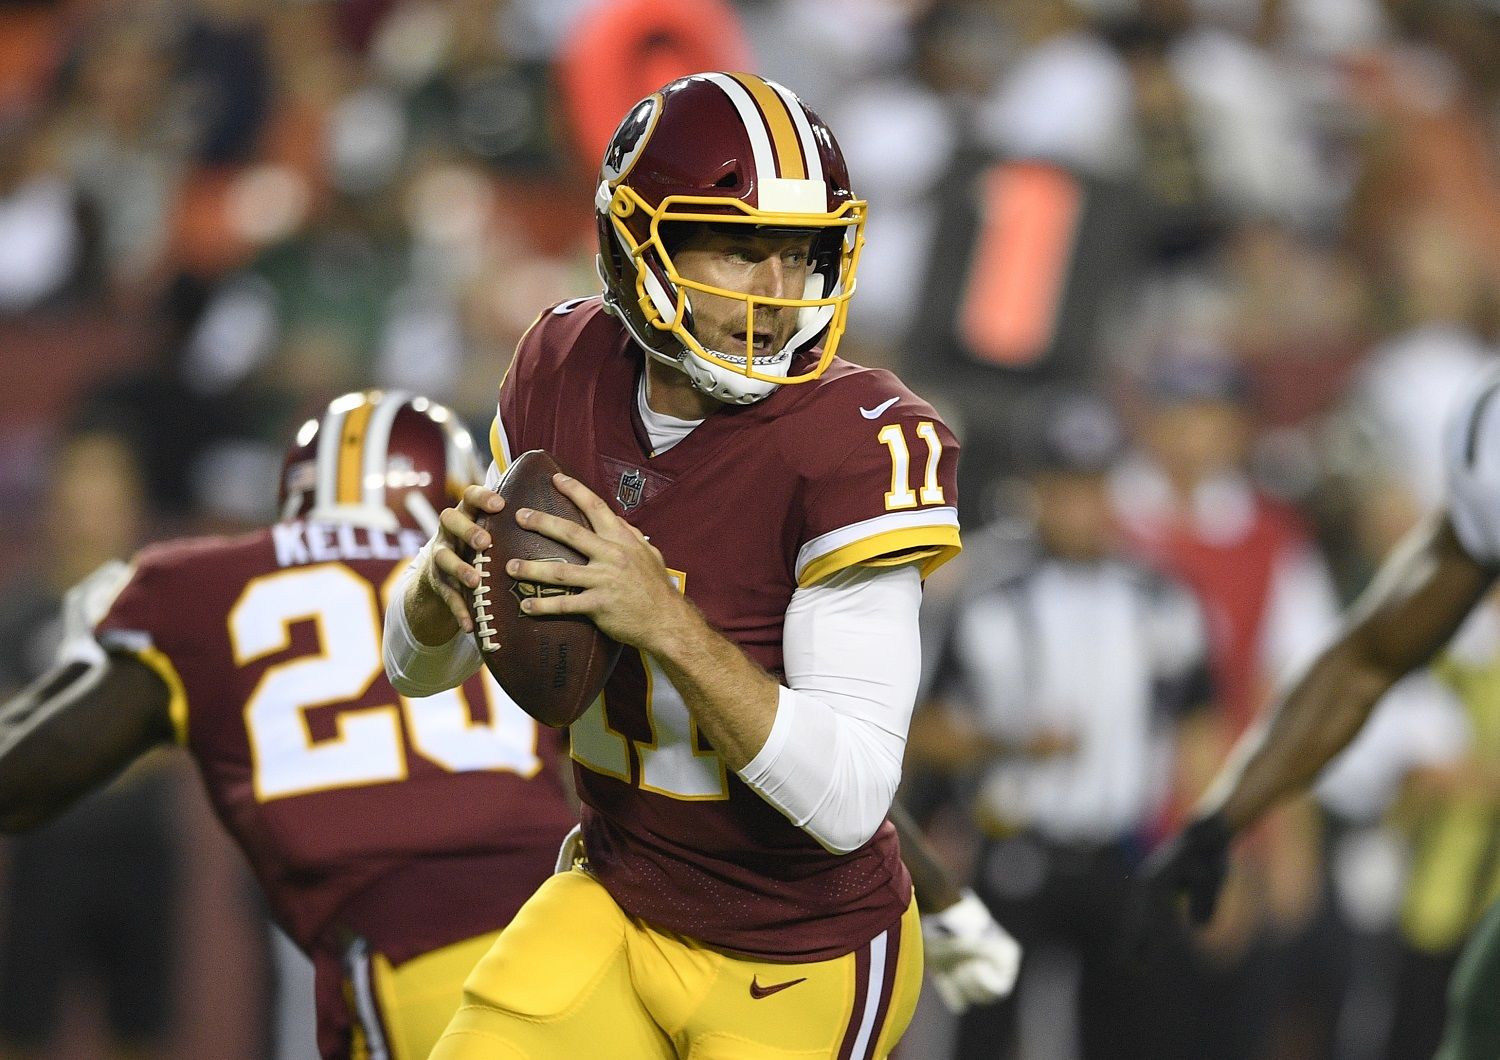 Washington Redskins quarterback Alex Smith (11) looks to pass during the first half of a preseason NFL football game against the New York Jets, Thursday, Aug. 16, 2018, in Landover, Md. (AP Photo/Nick Wass)